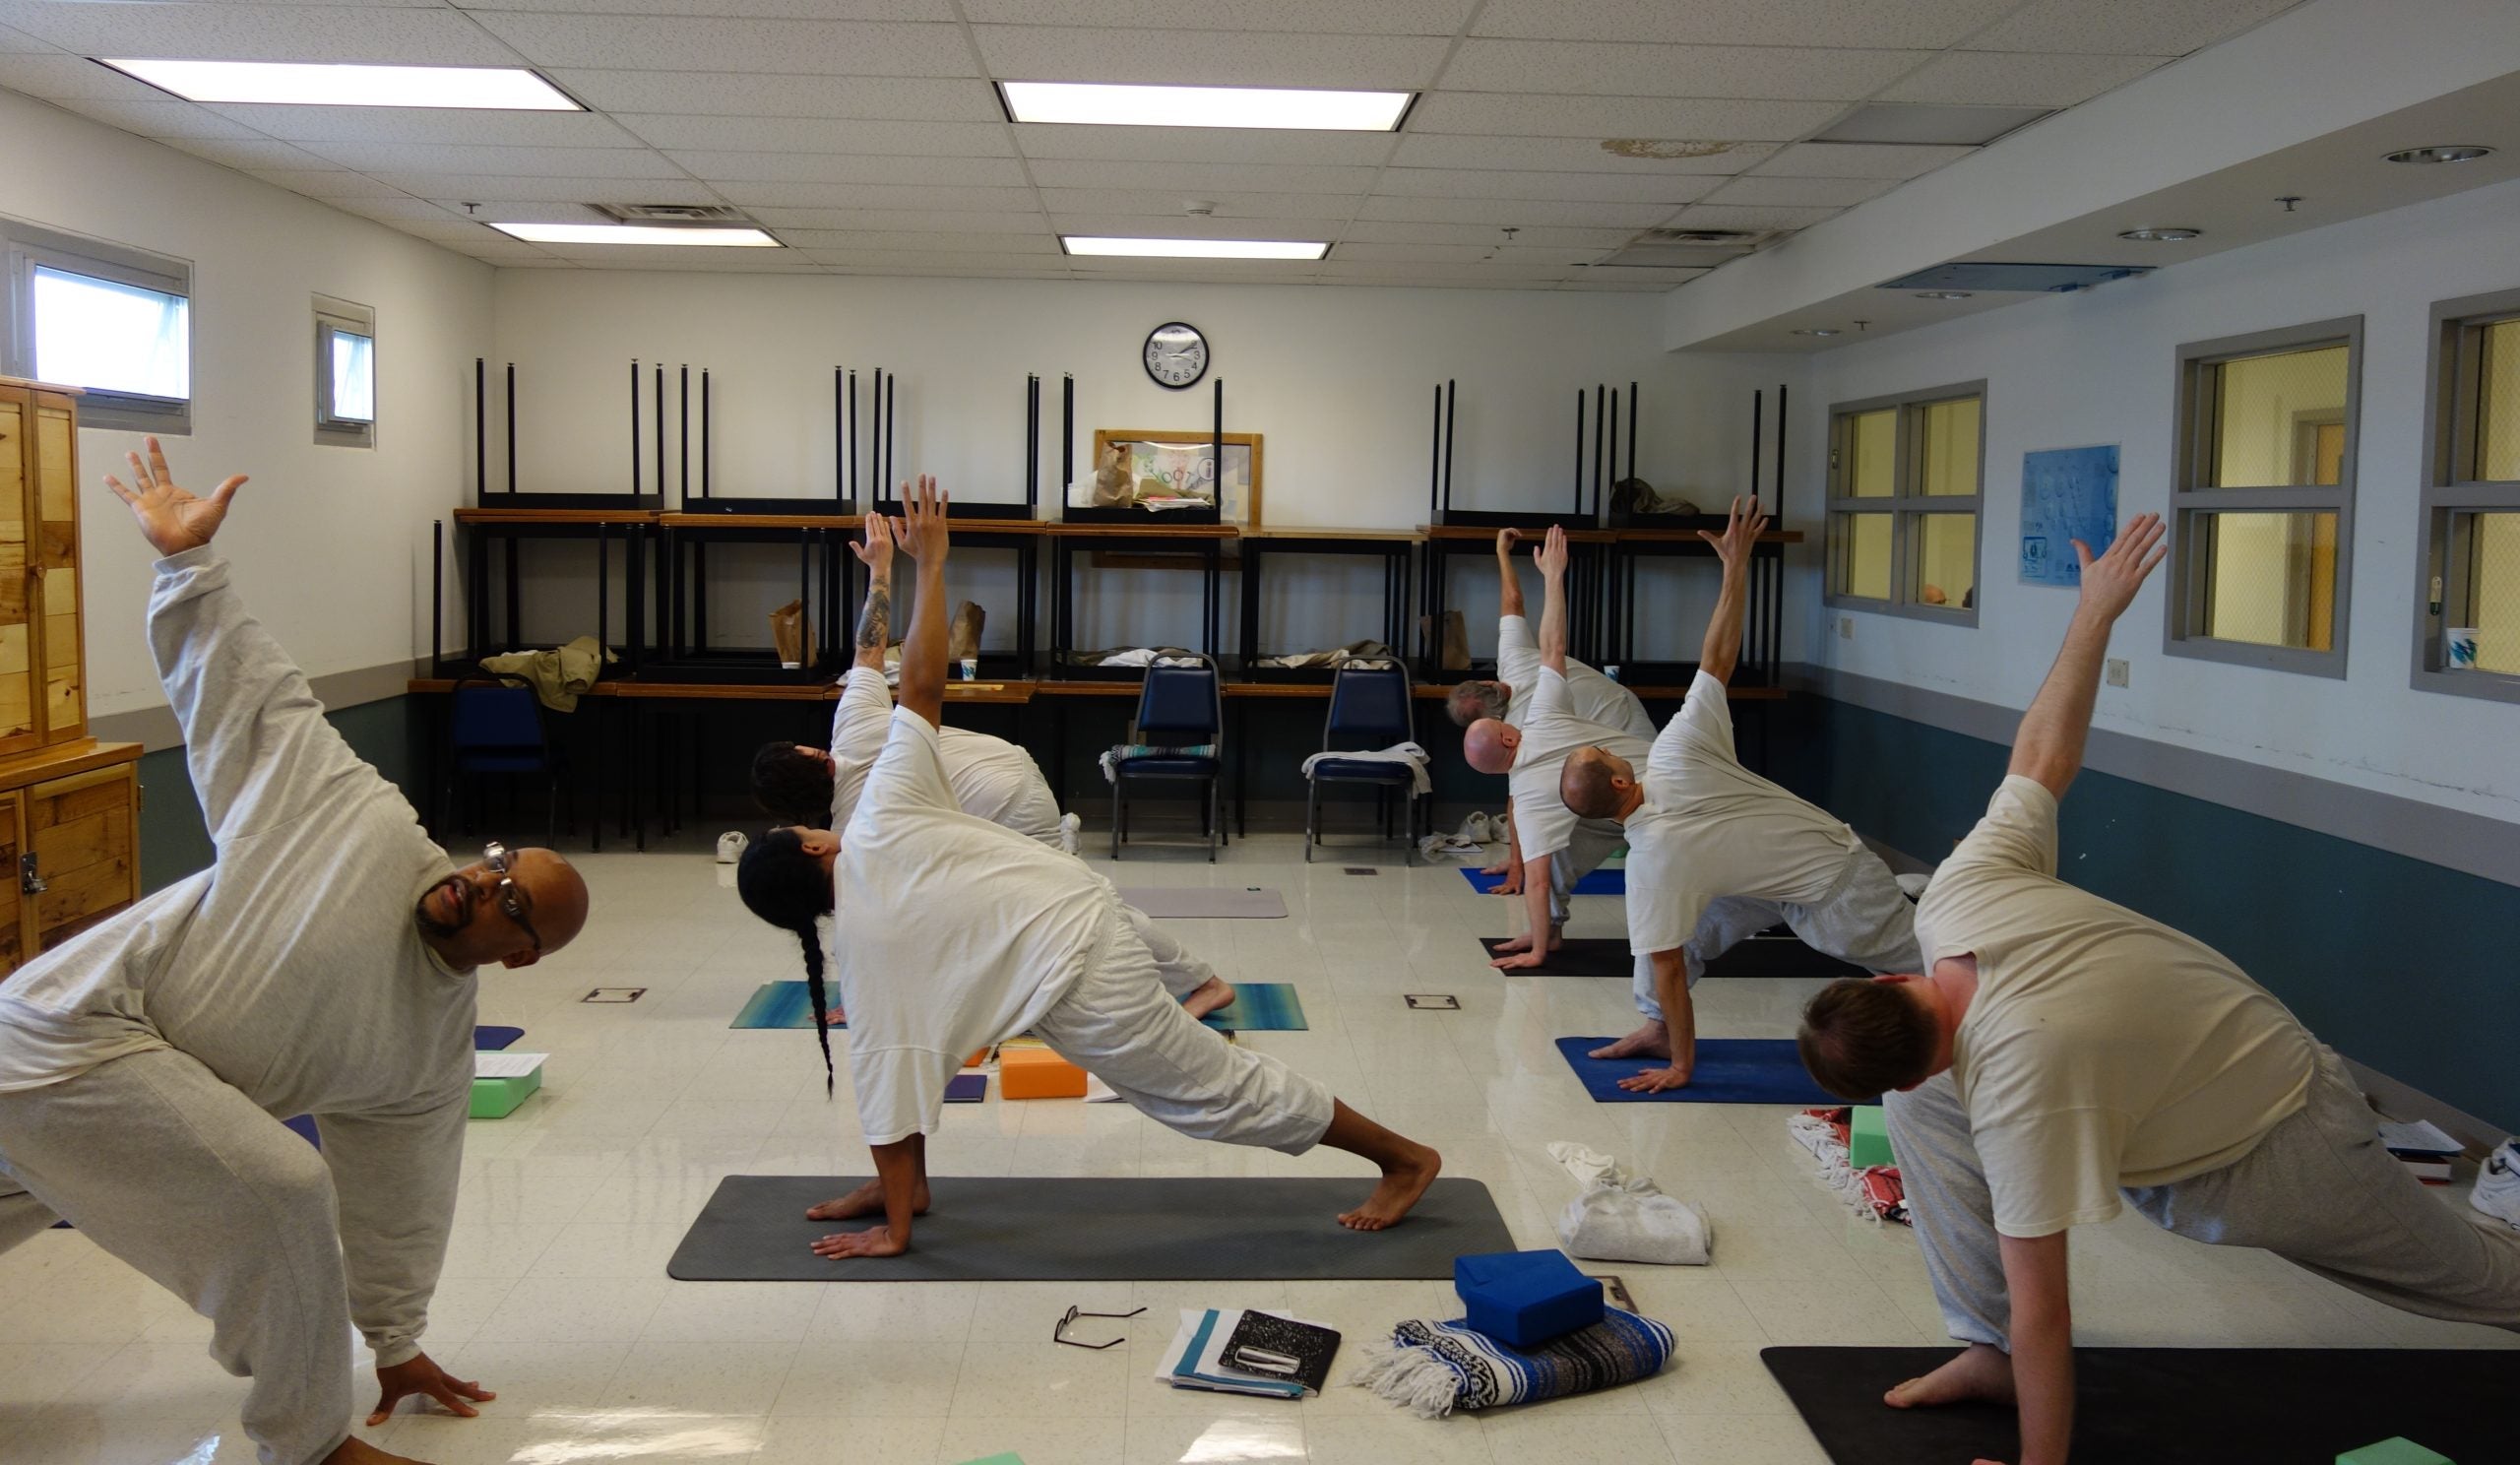 The Nonprofit ‘Yoga Behind Bars’ Is Helping Incarcerated People Heal